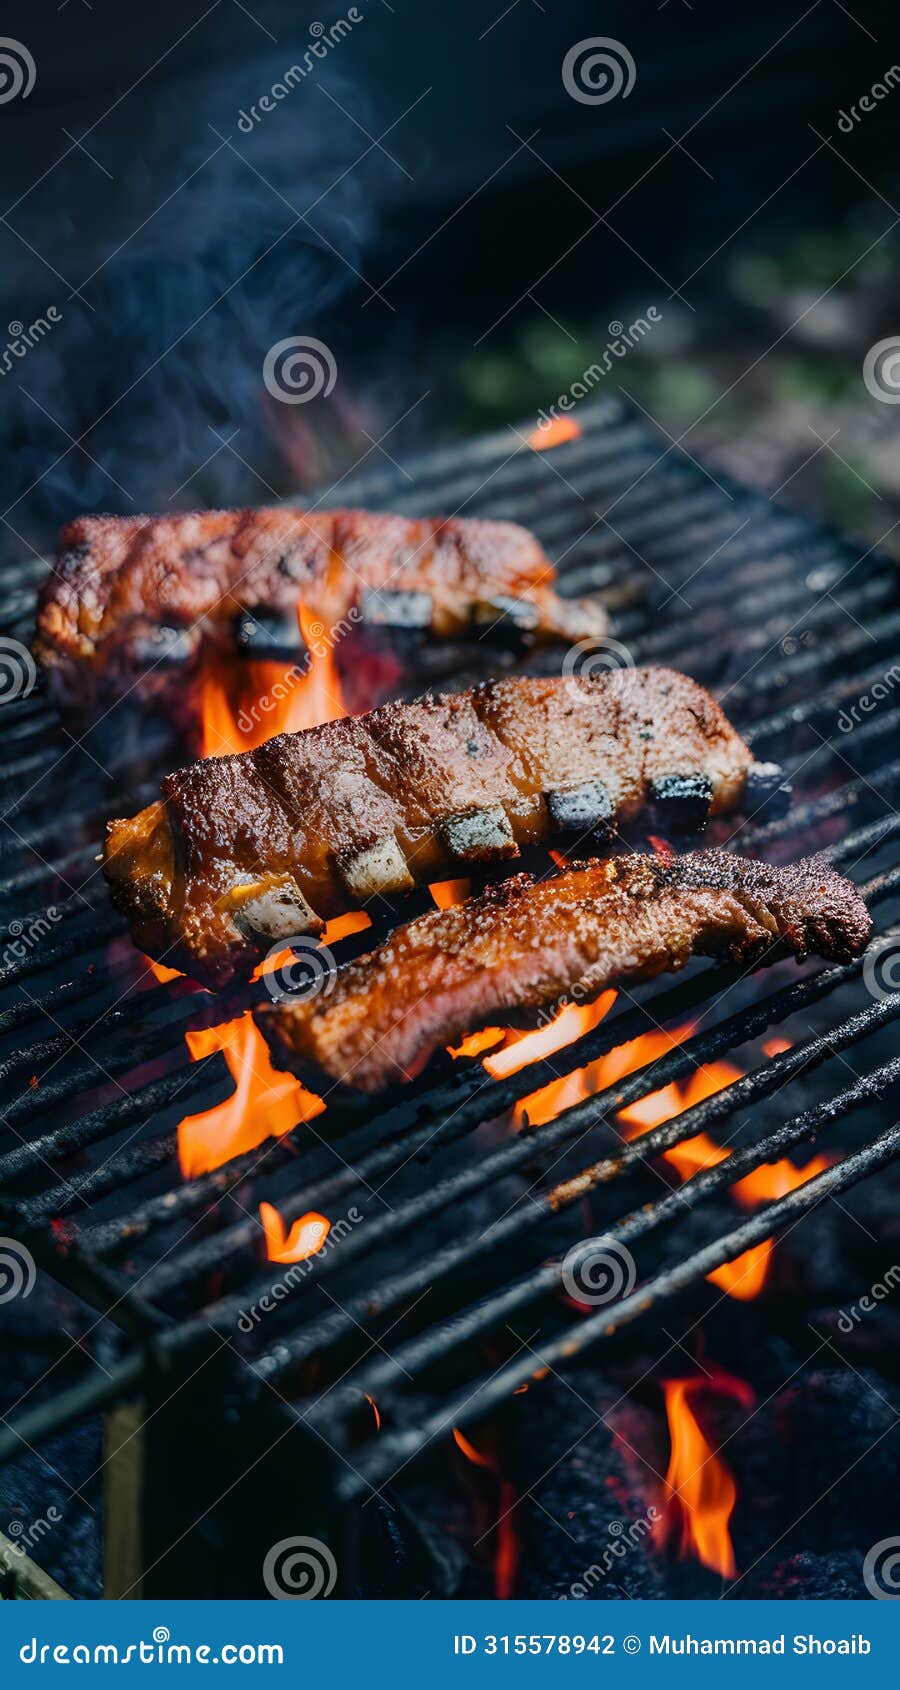 fried pork ribs grilling on open flame, flavorful street food